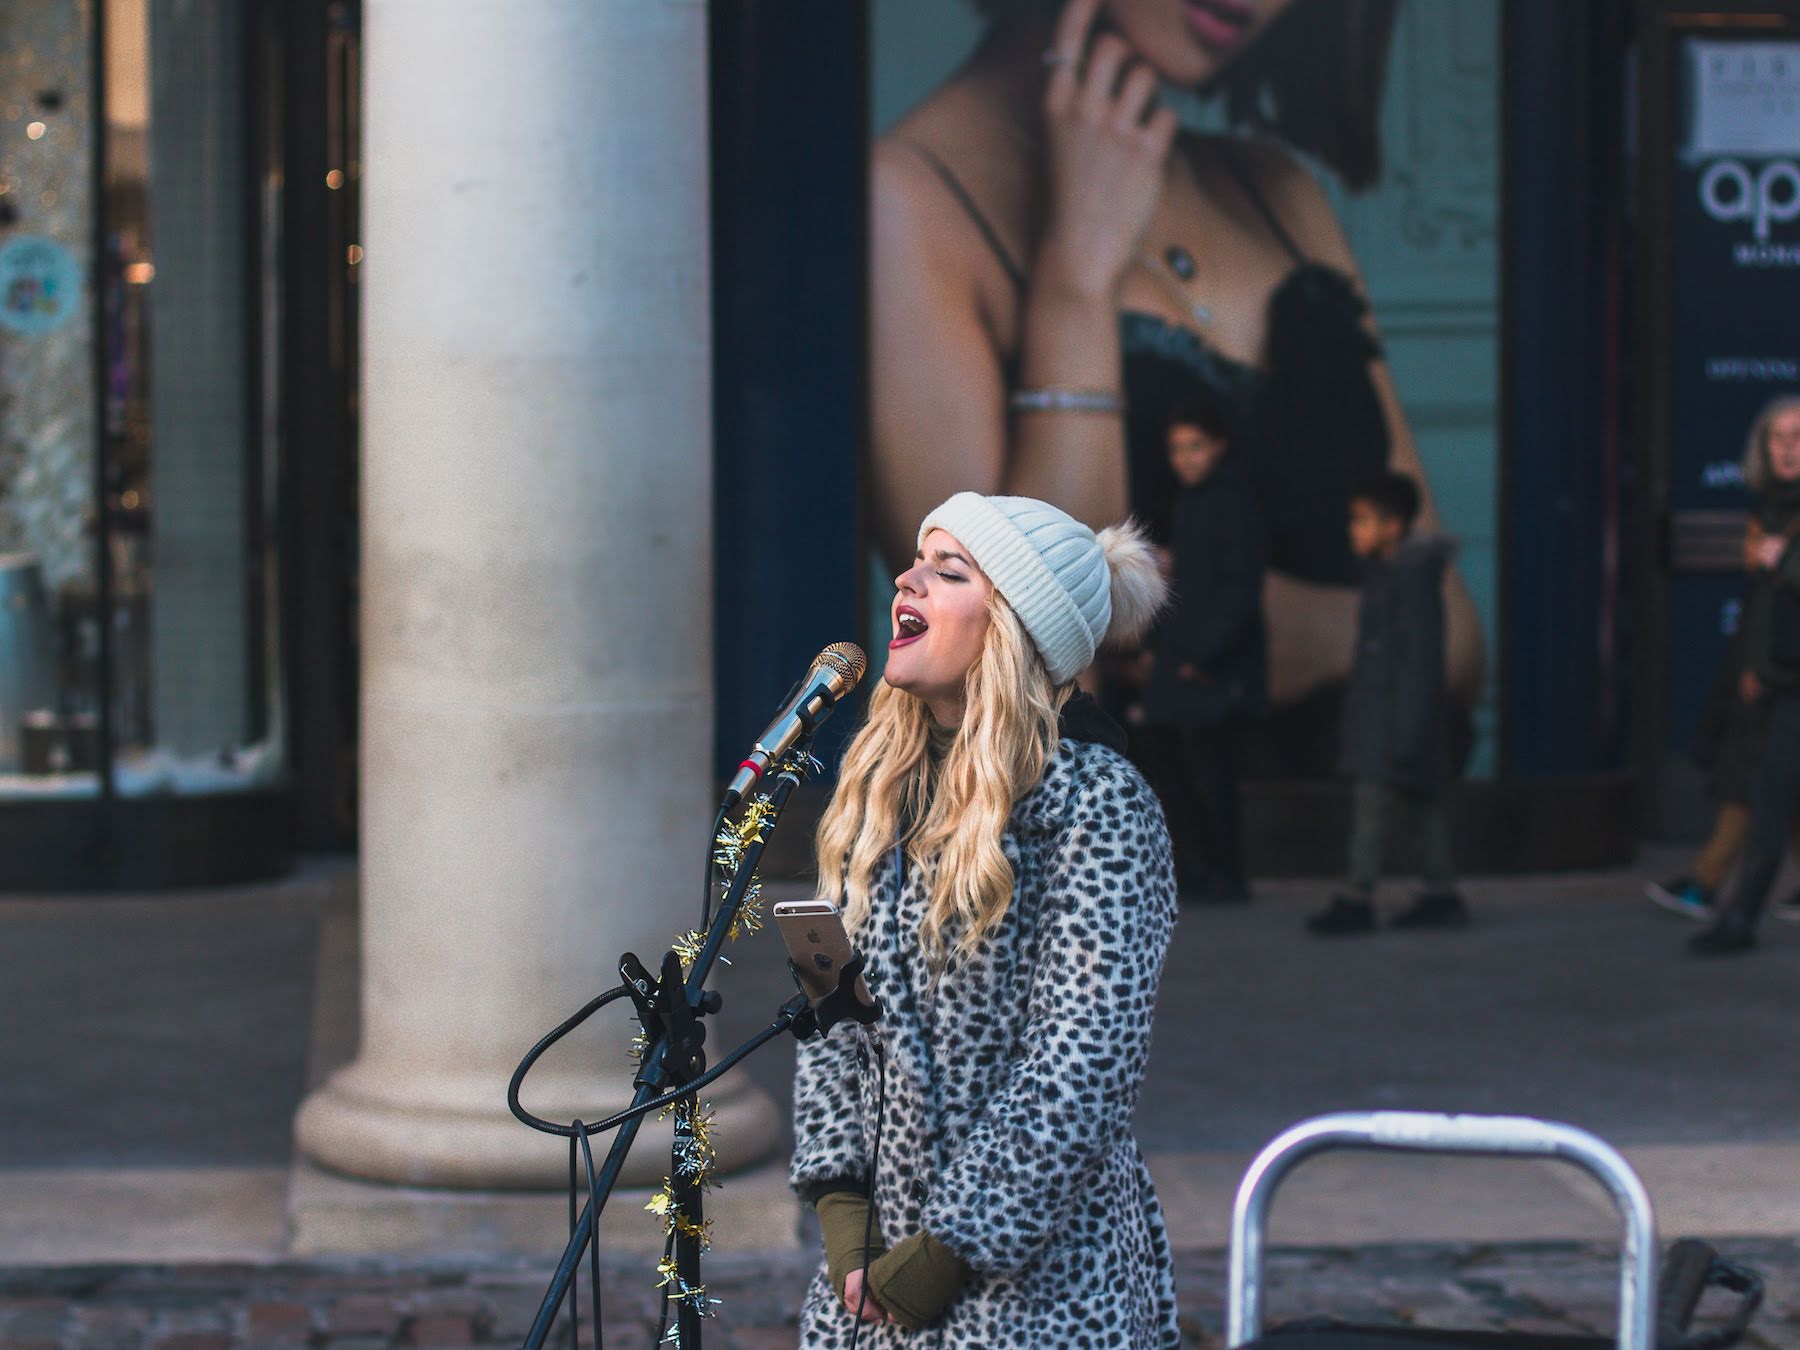 Busker with incredible voice, London, UK